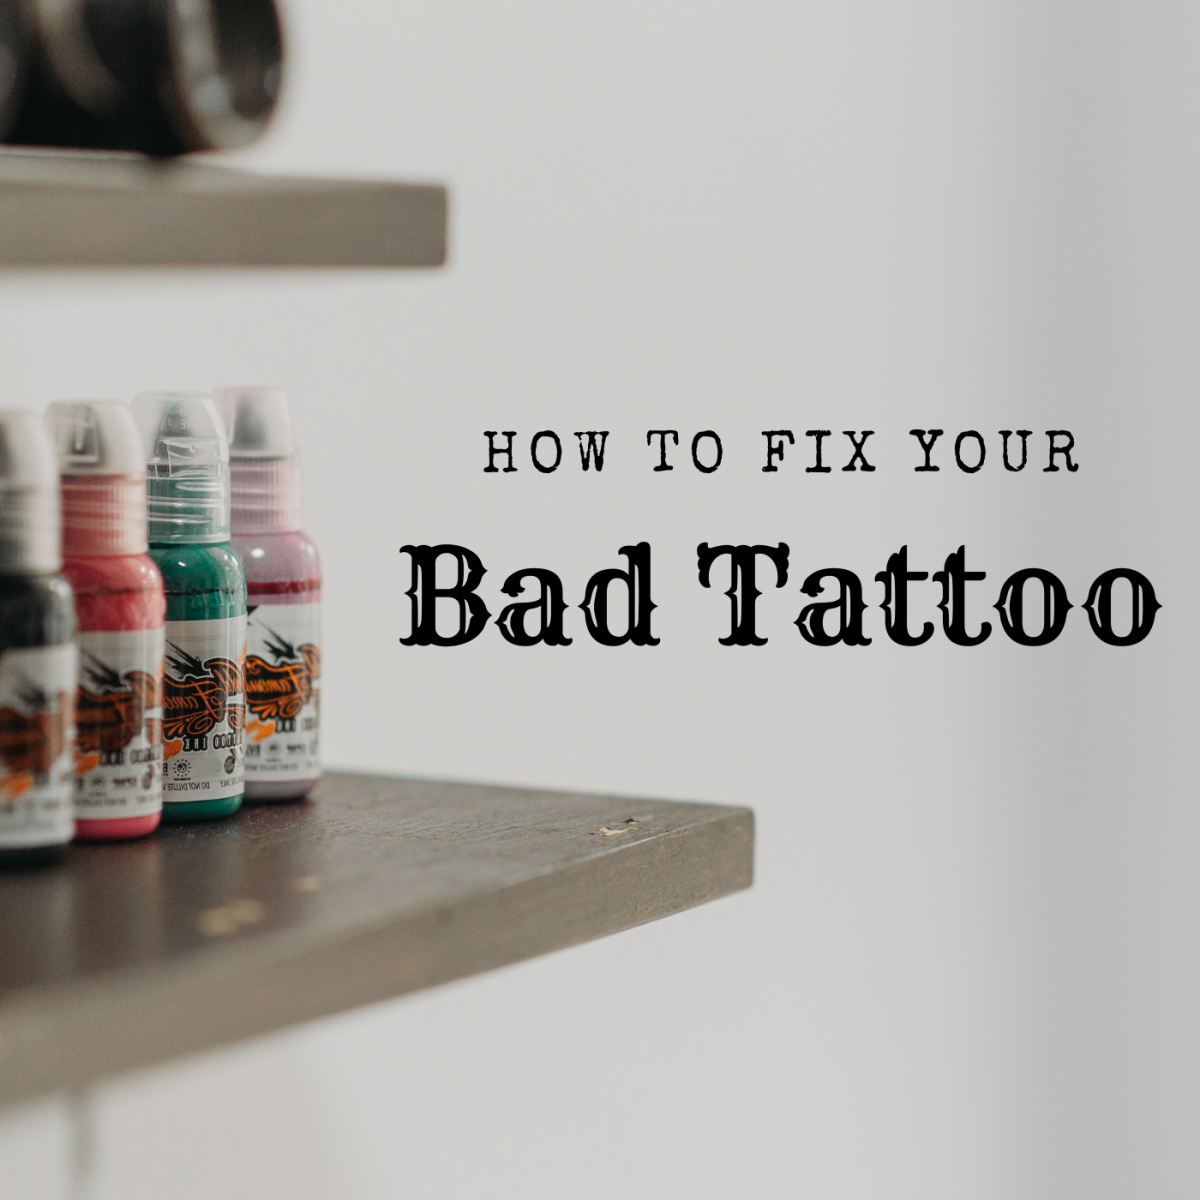 What to Do With a Bad Tattoo: Cover It? Remove It? Why Not Reinvent It?